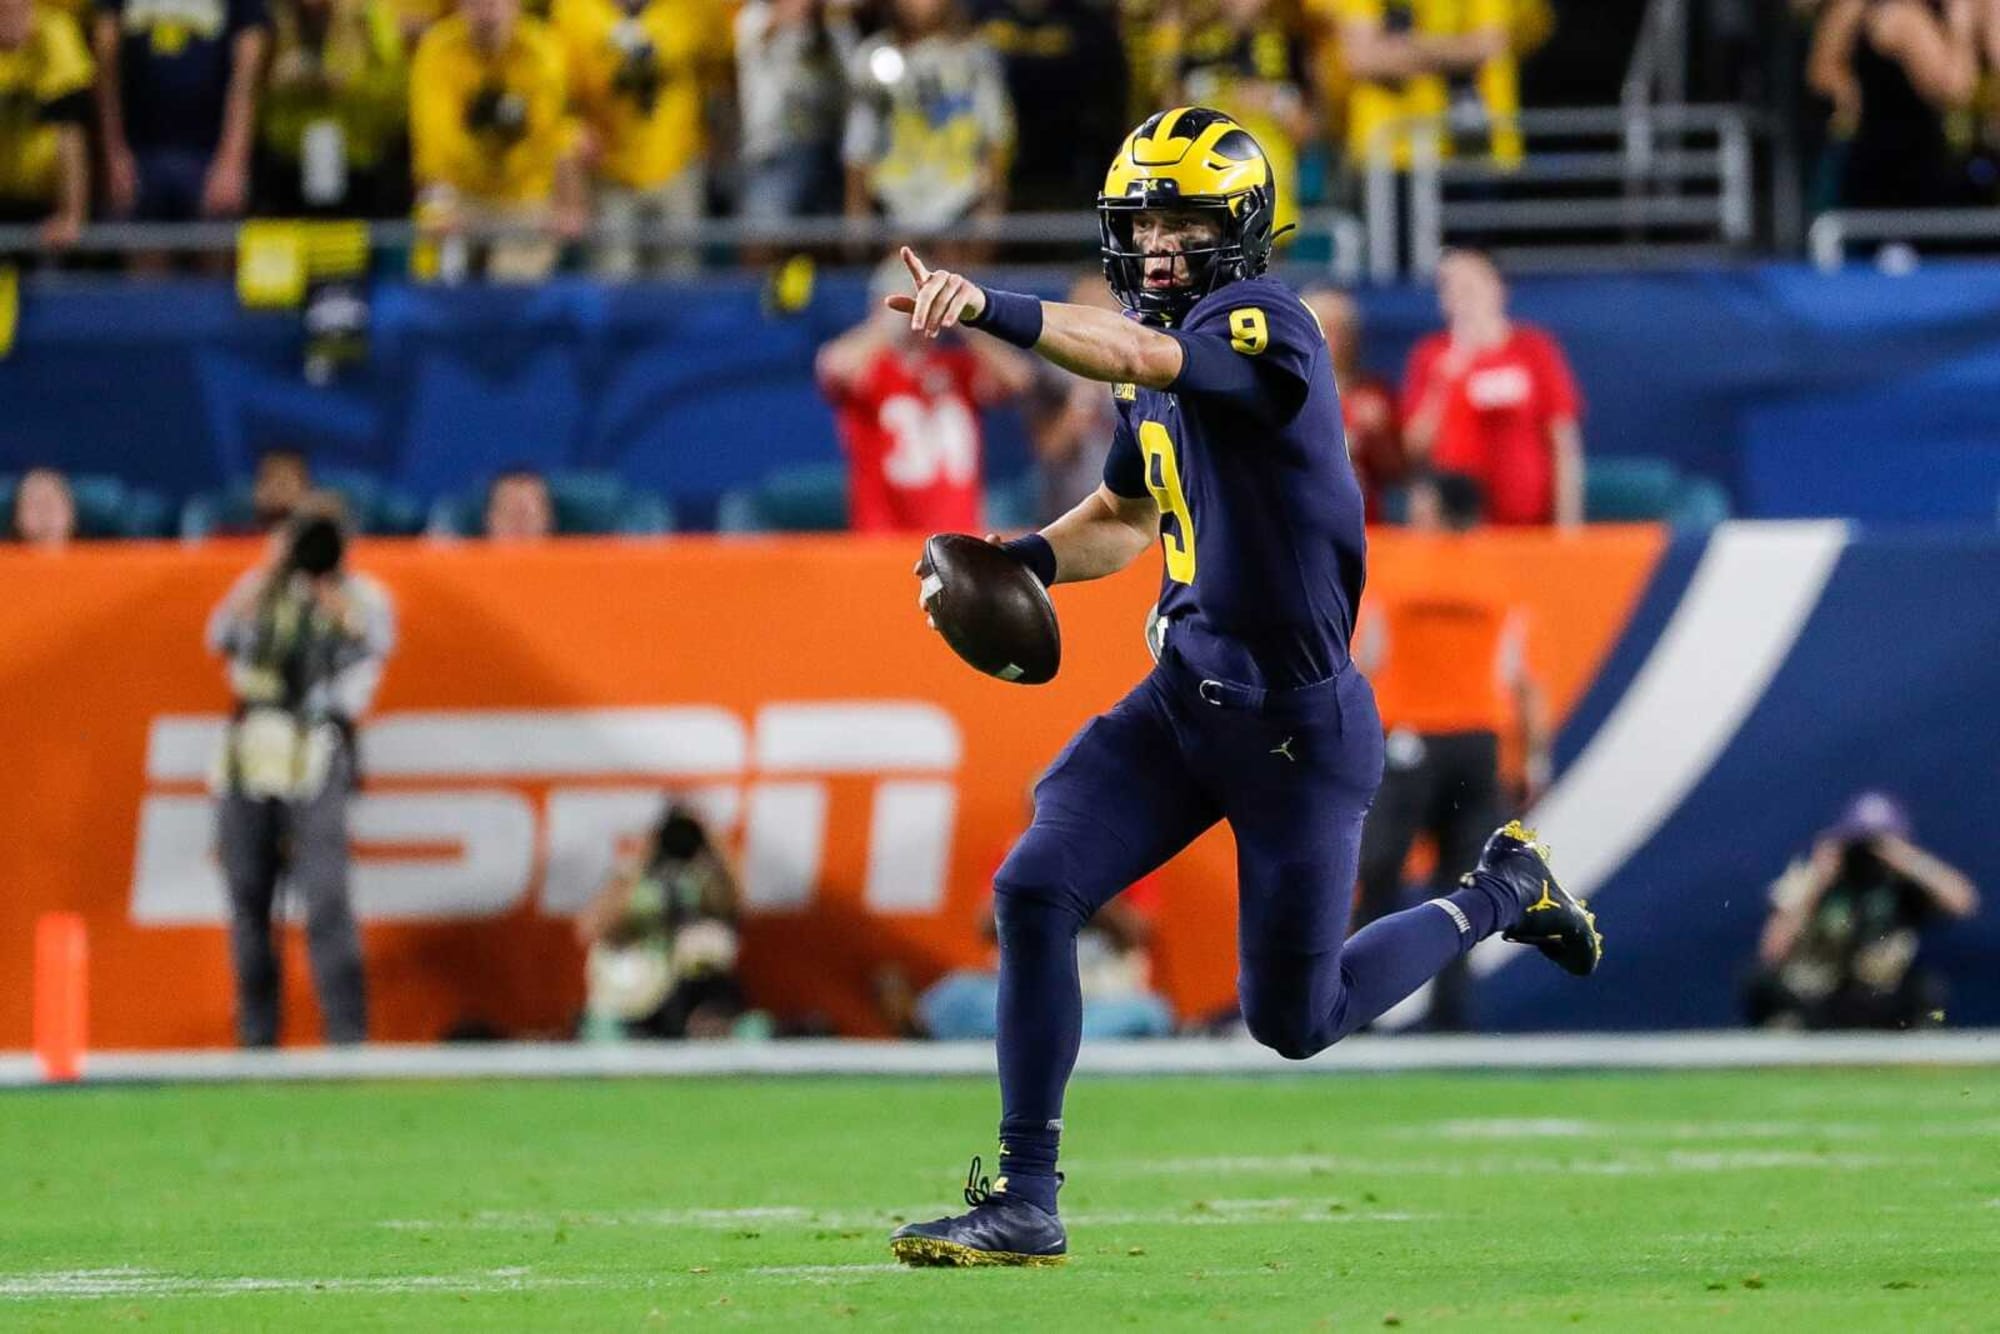 Is Michigan Football being too cautious with J.J. McCarthy?